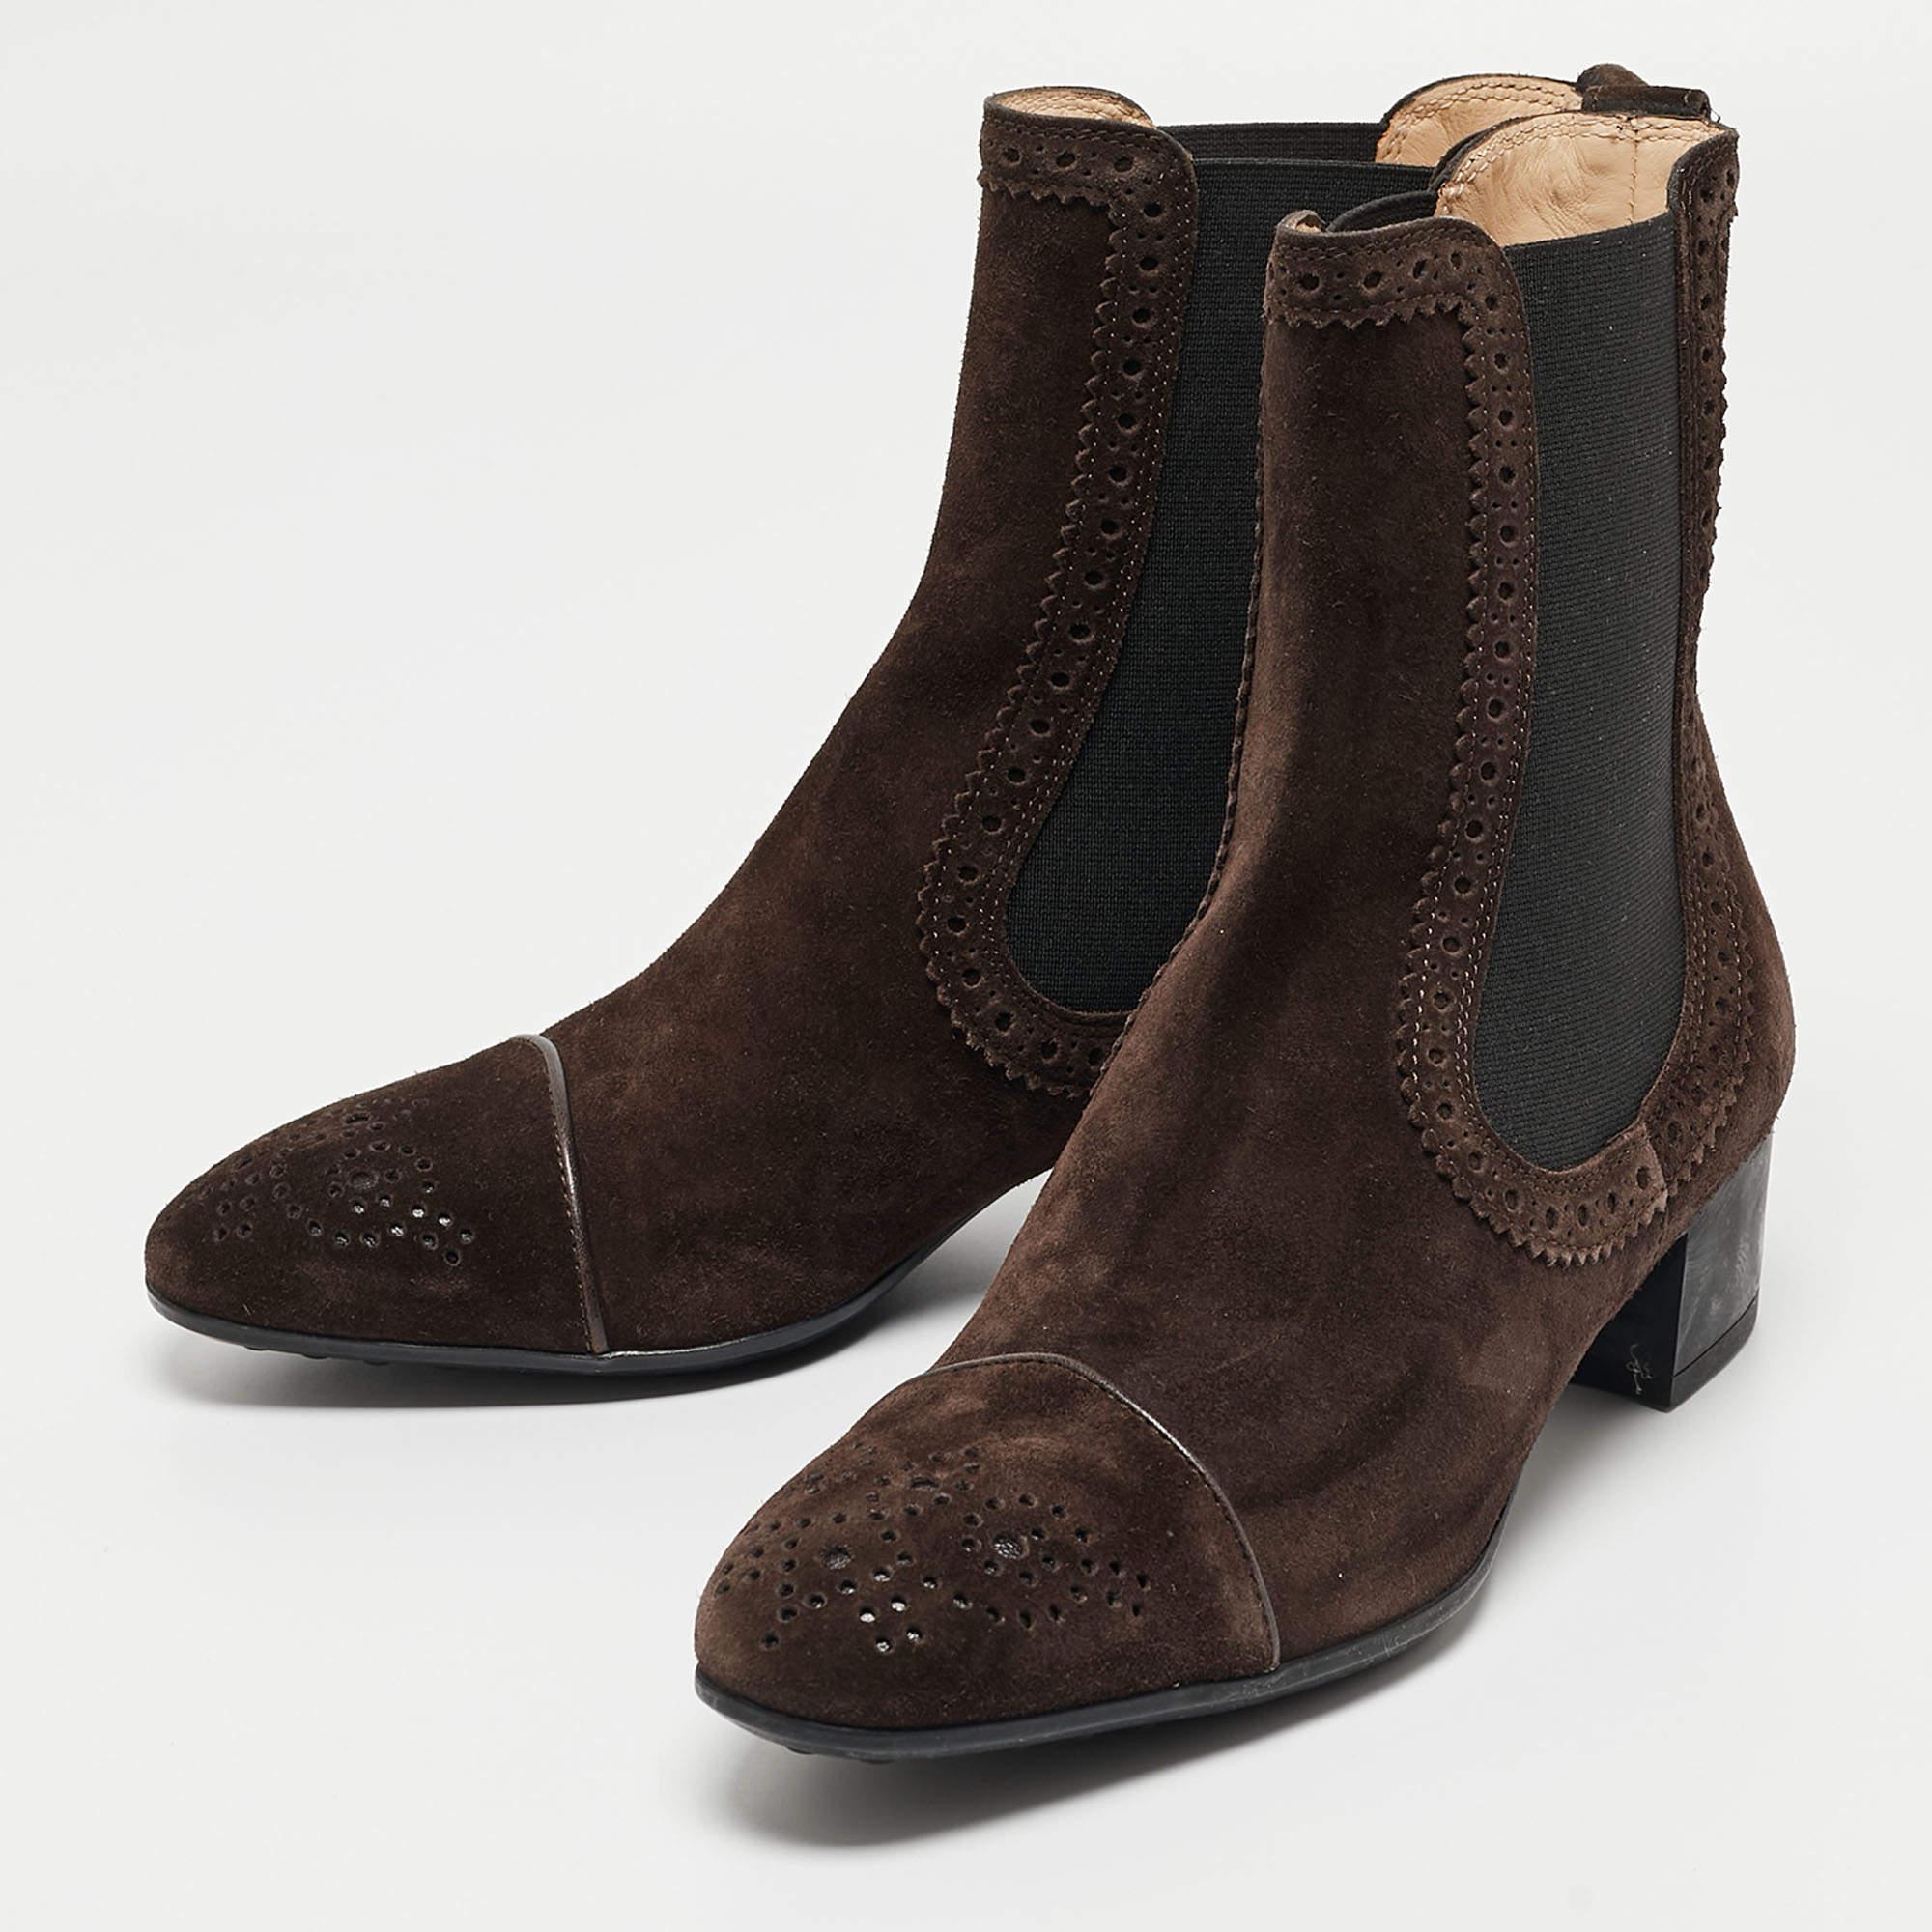 Boots are an essential part of your wardrobe, and these boots, crafted from top-quality materials, are a fine choice. Offering the best of comfort and style, this sturdy-soled pair would be great with skinny jeans for a casual day out!

Includes: